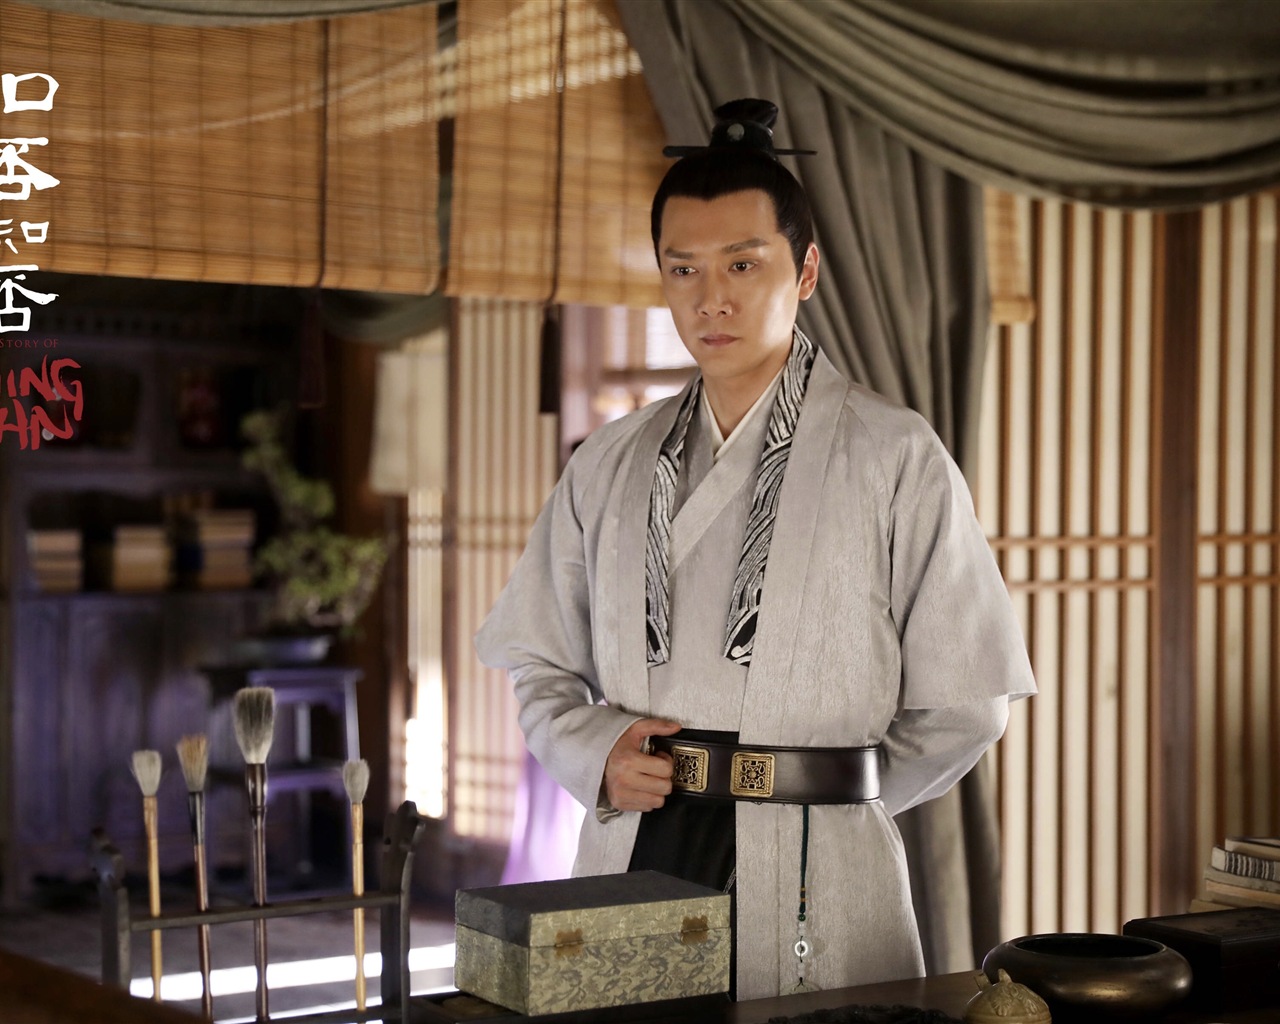 The Story Of MingLan, TV series HD wallpapers #49 - 1280x1024